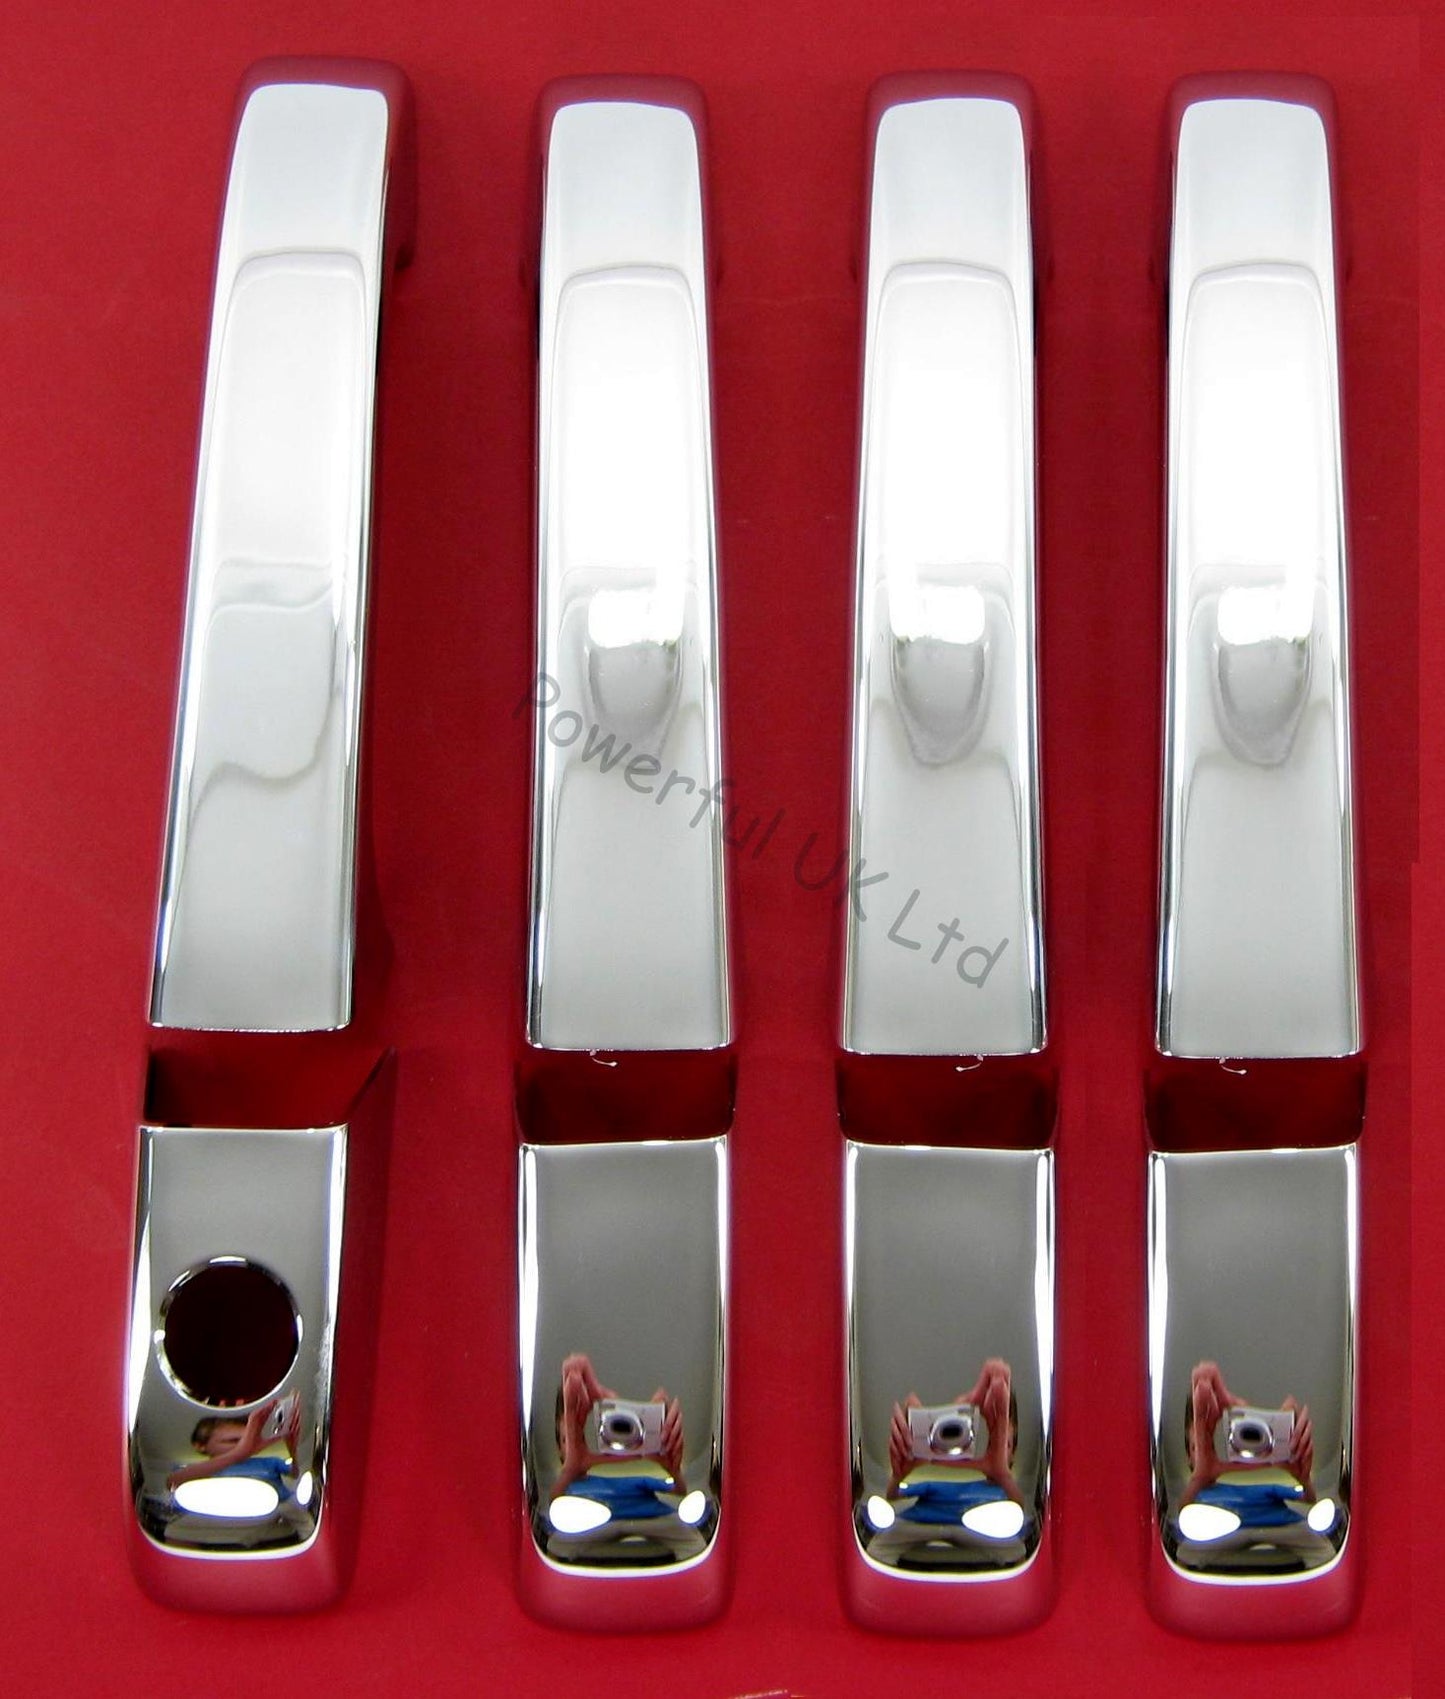 Door Handles Covers (8pc) for Range Rover P38 - Chrome